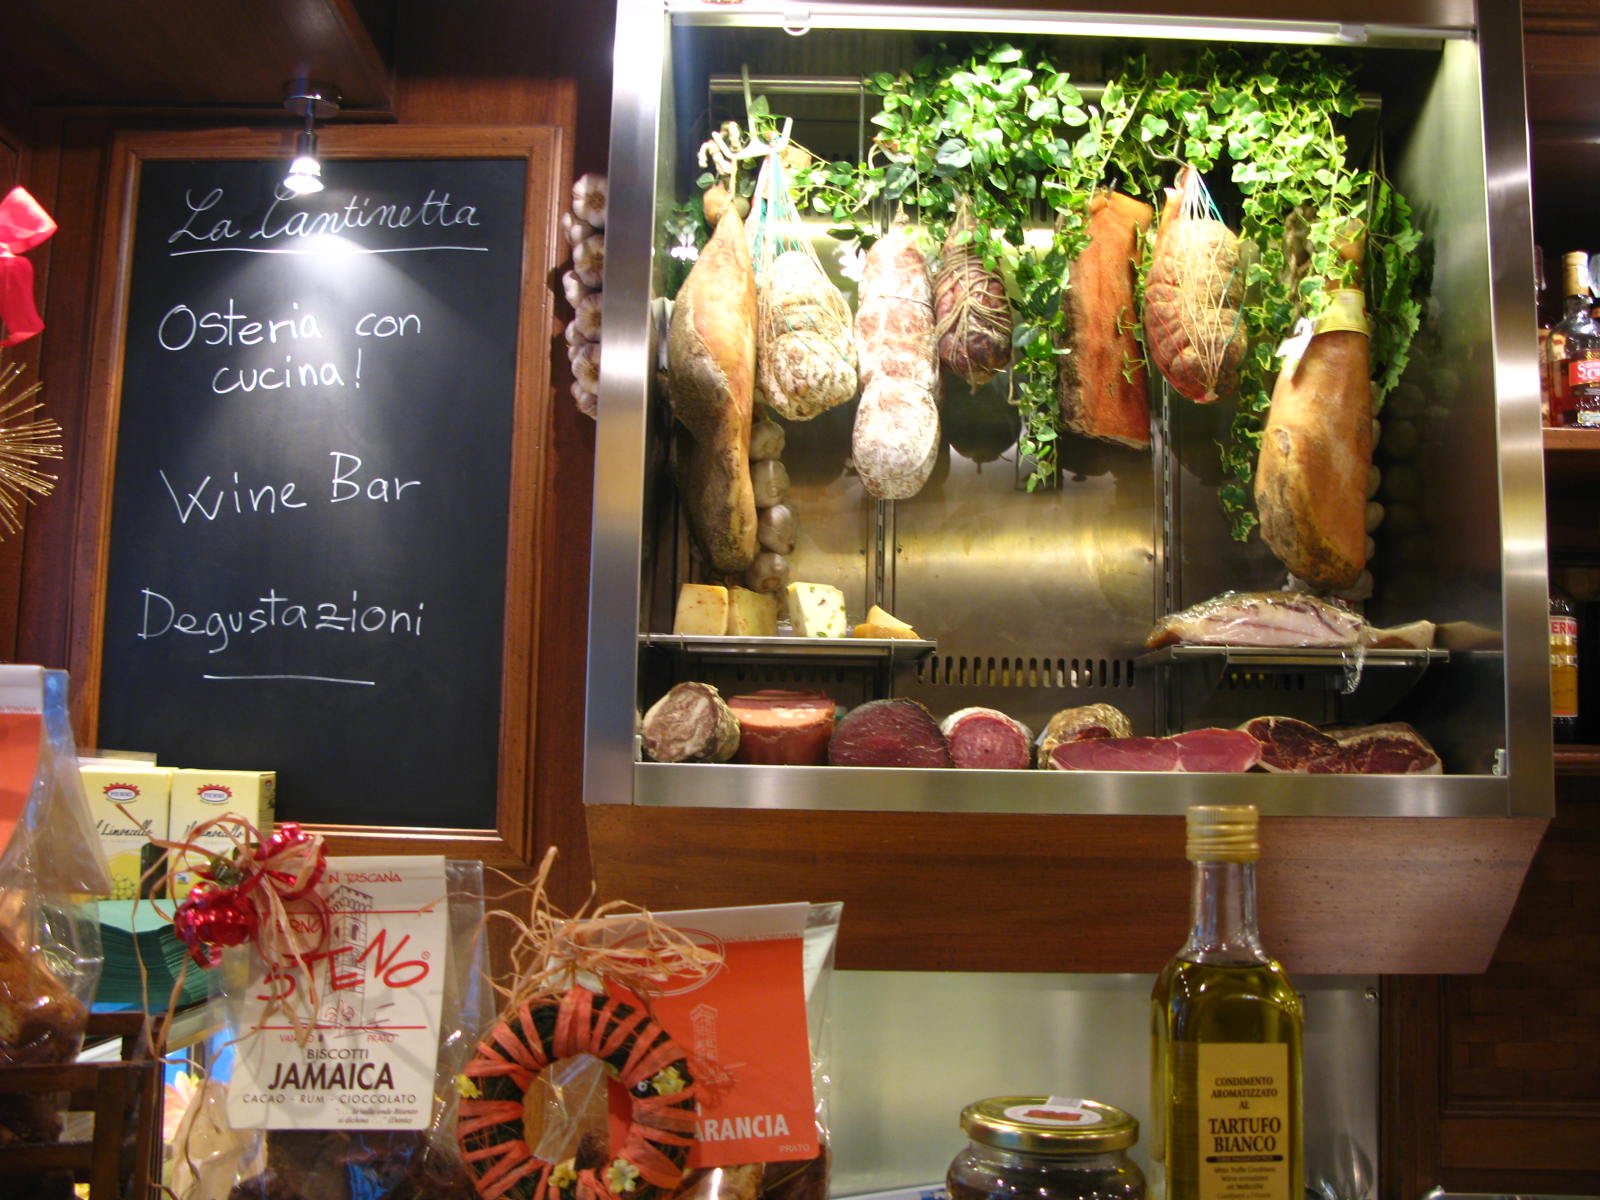 Osteria La Cantinetta in Florence Italy | blog.studentsville.it